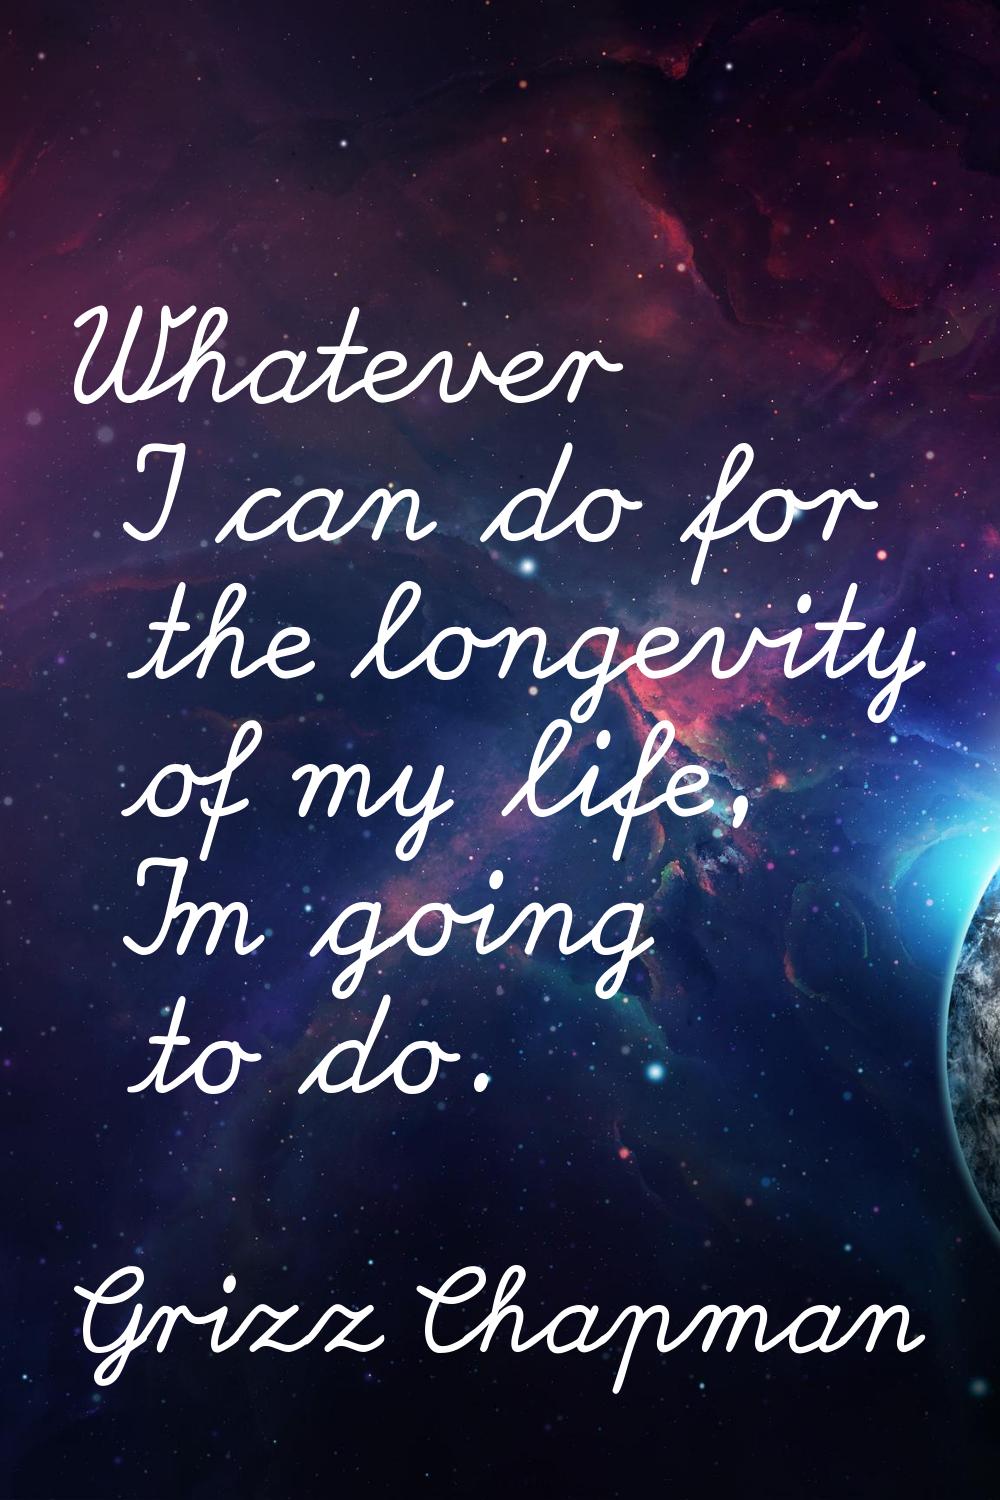 Whatever I can do for the longevity of my life, I'm going to do.